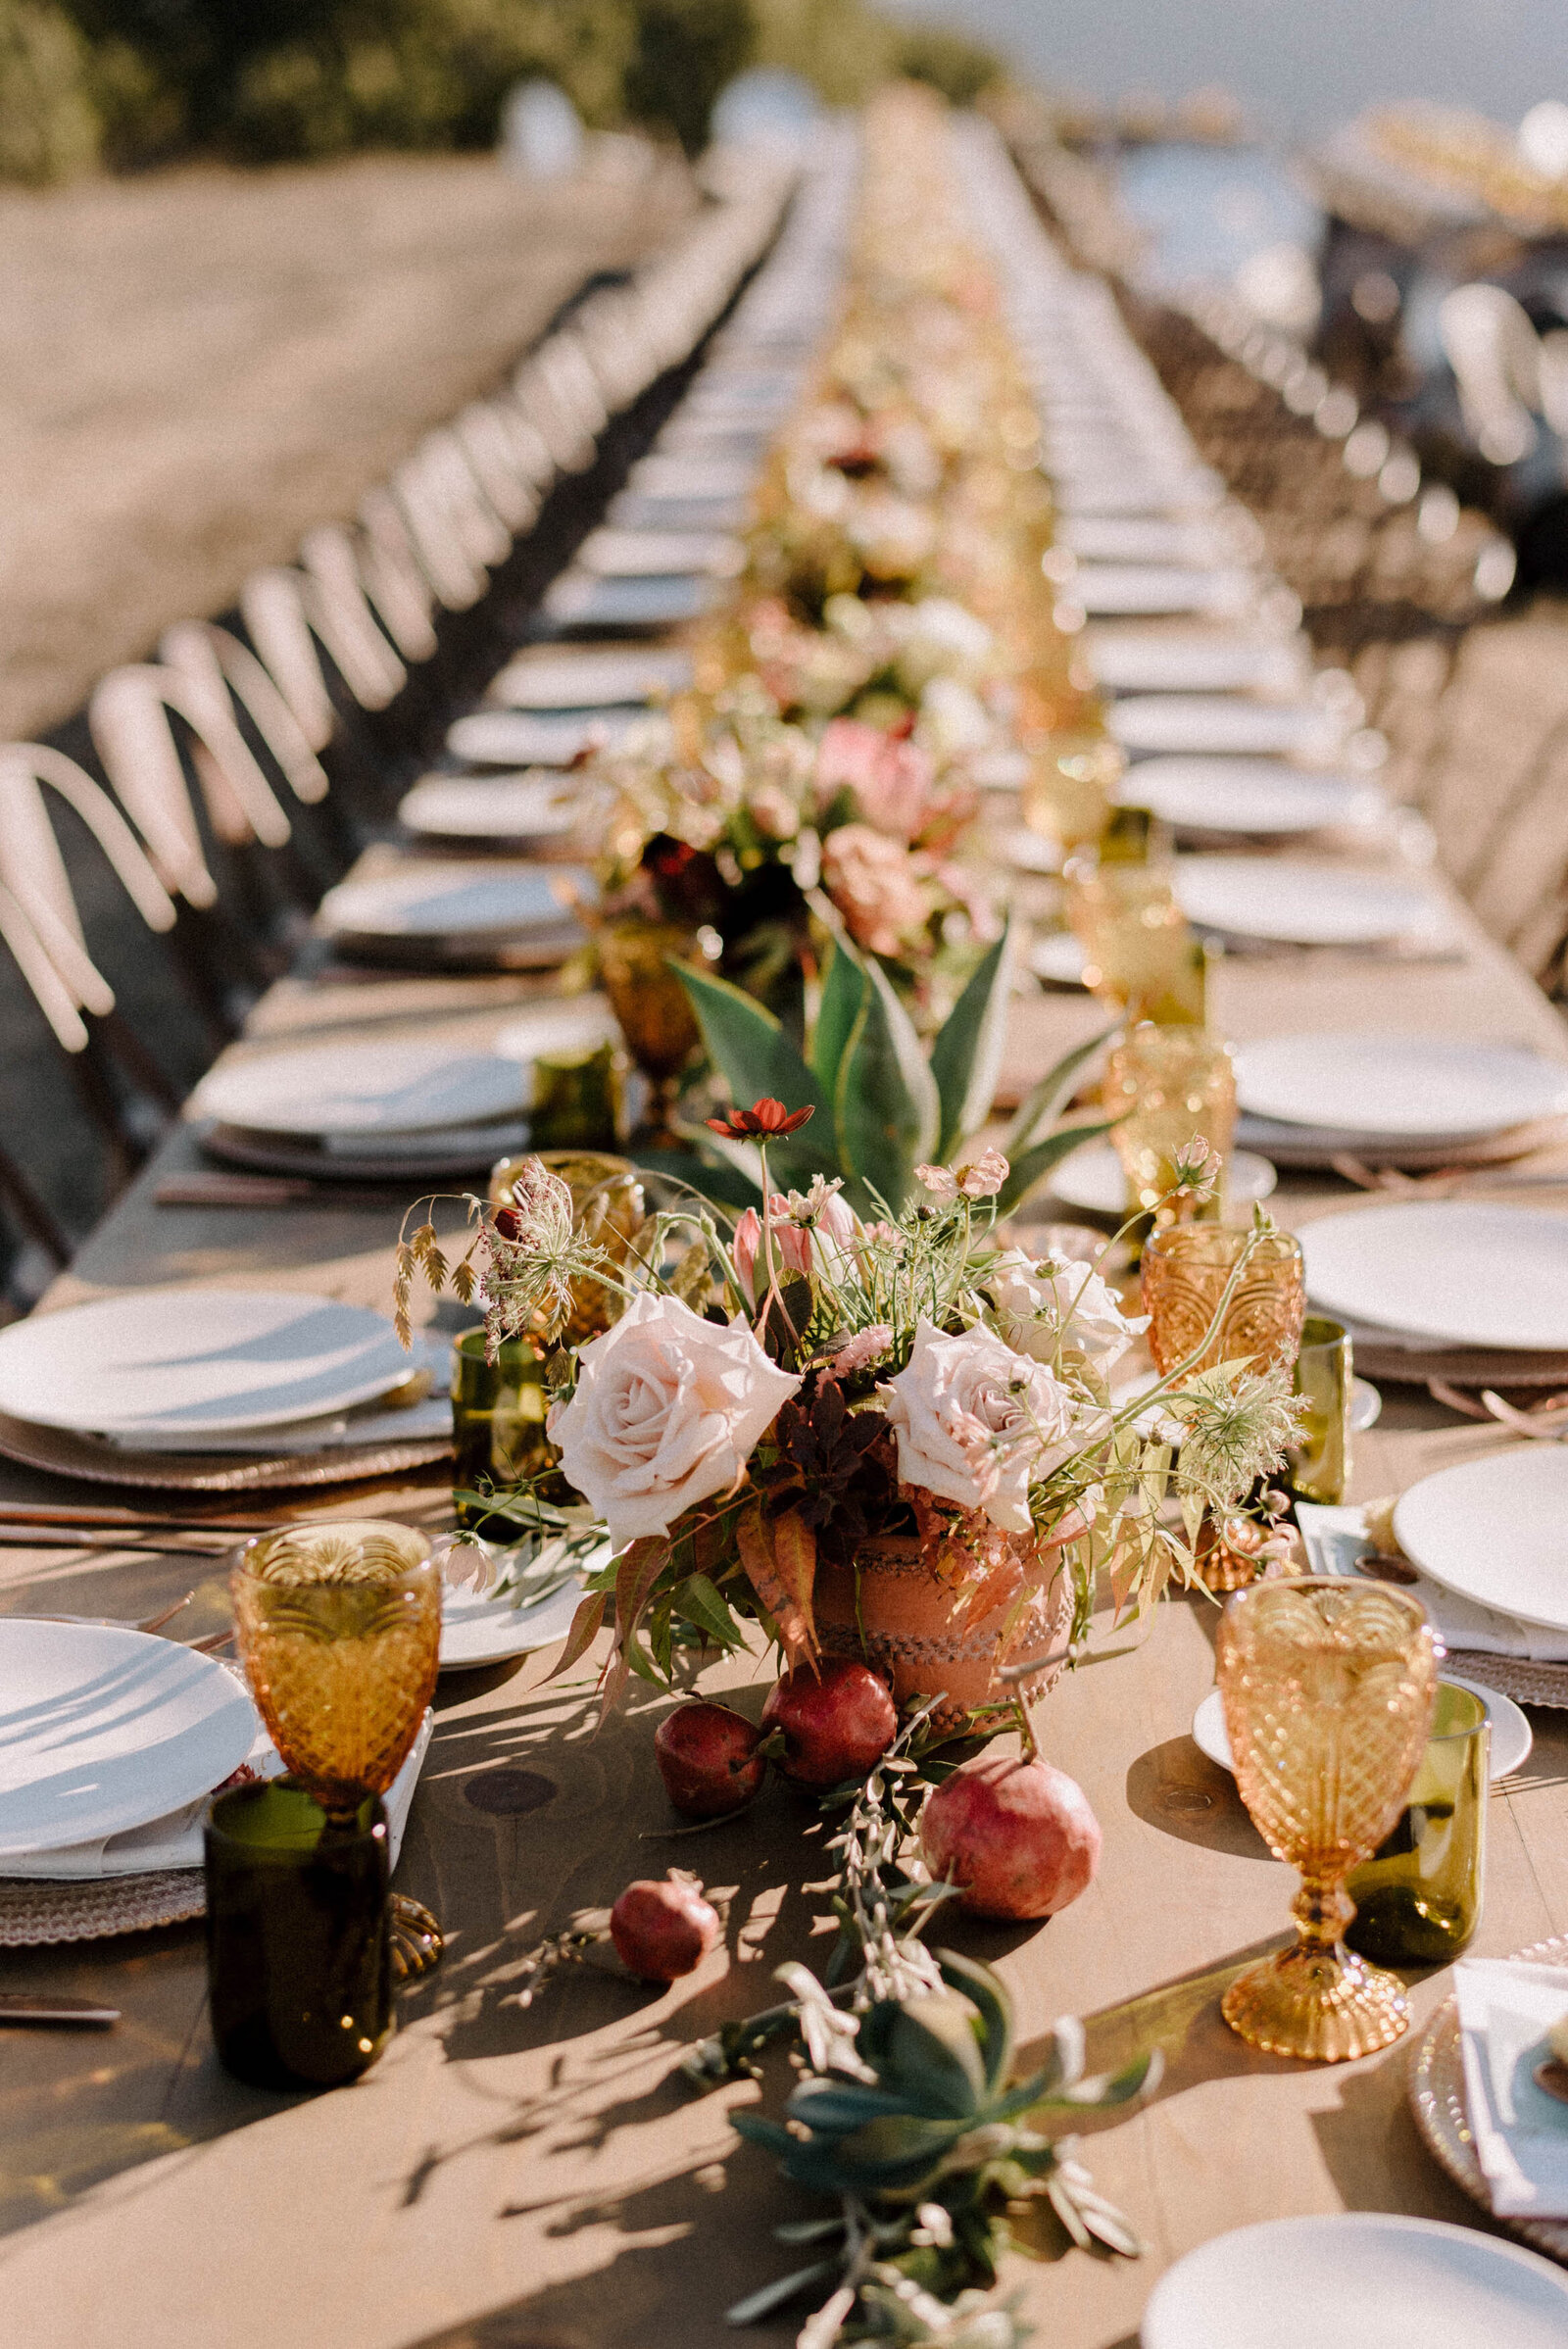 Long Farm Tables with Flowers for a wedding dinner at Albatross Ridge